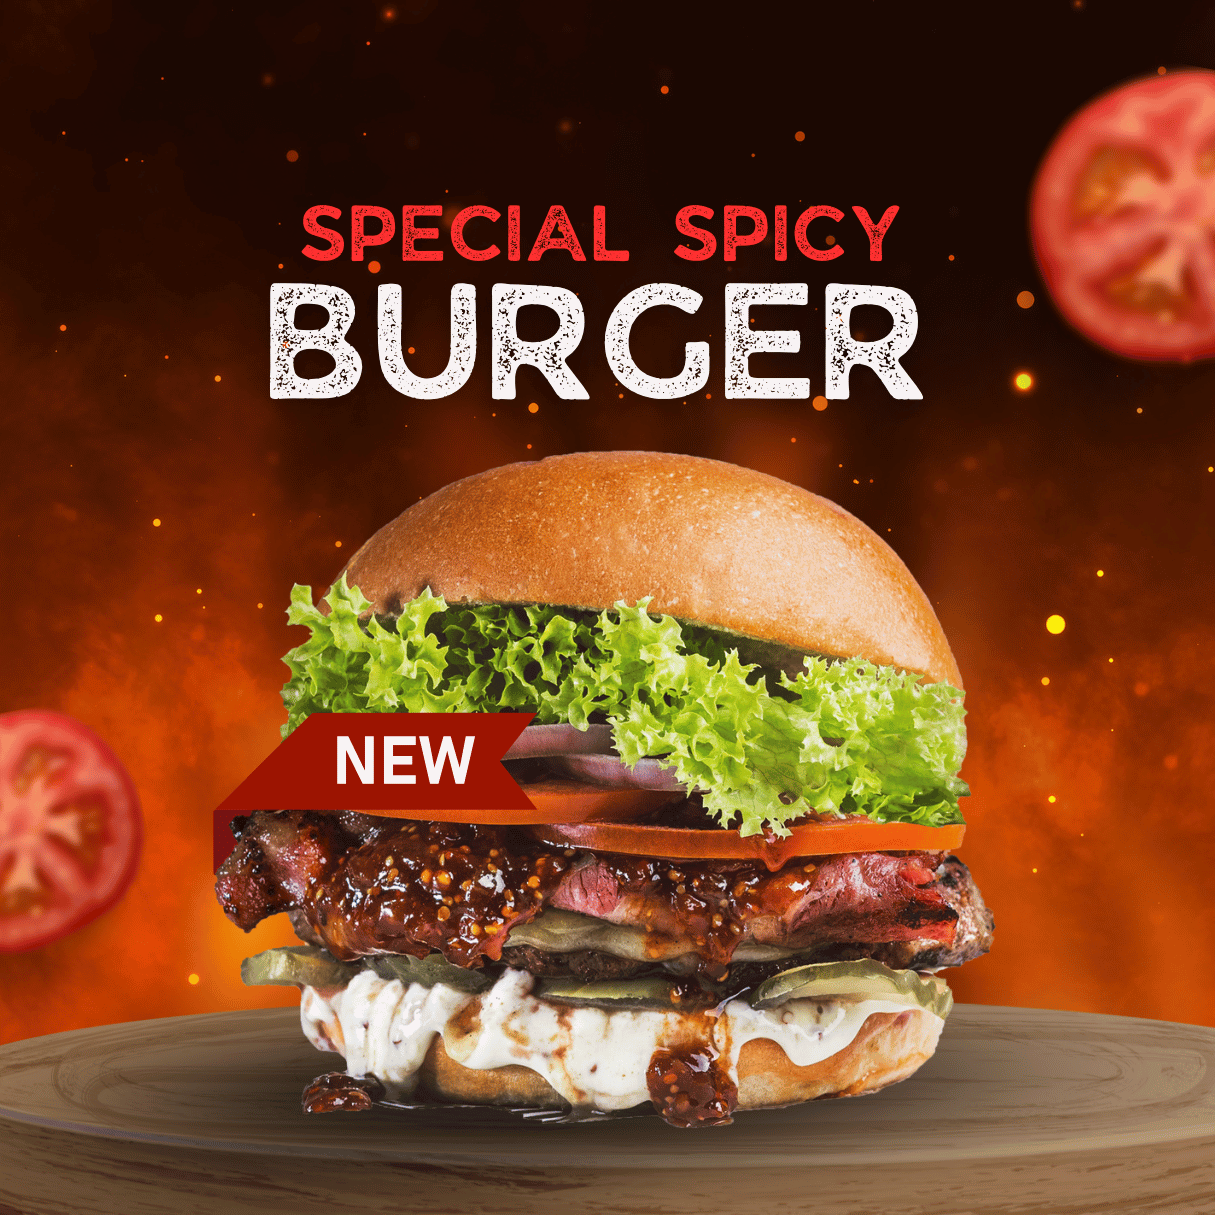 Special Spicy Burger preview image.